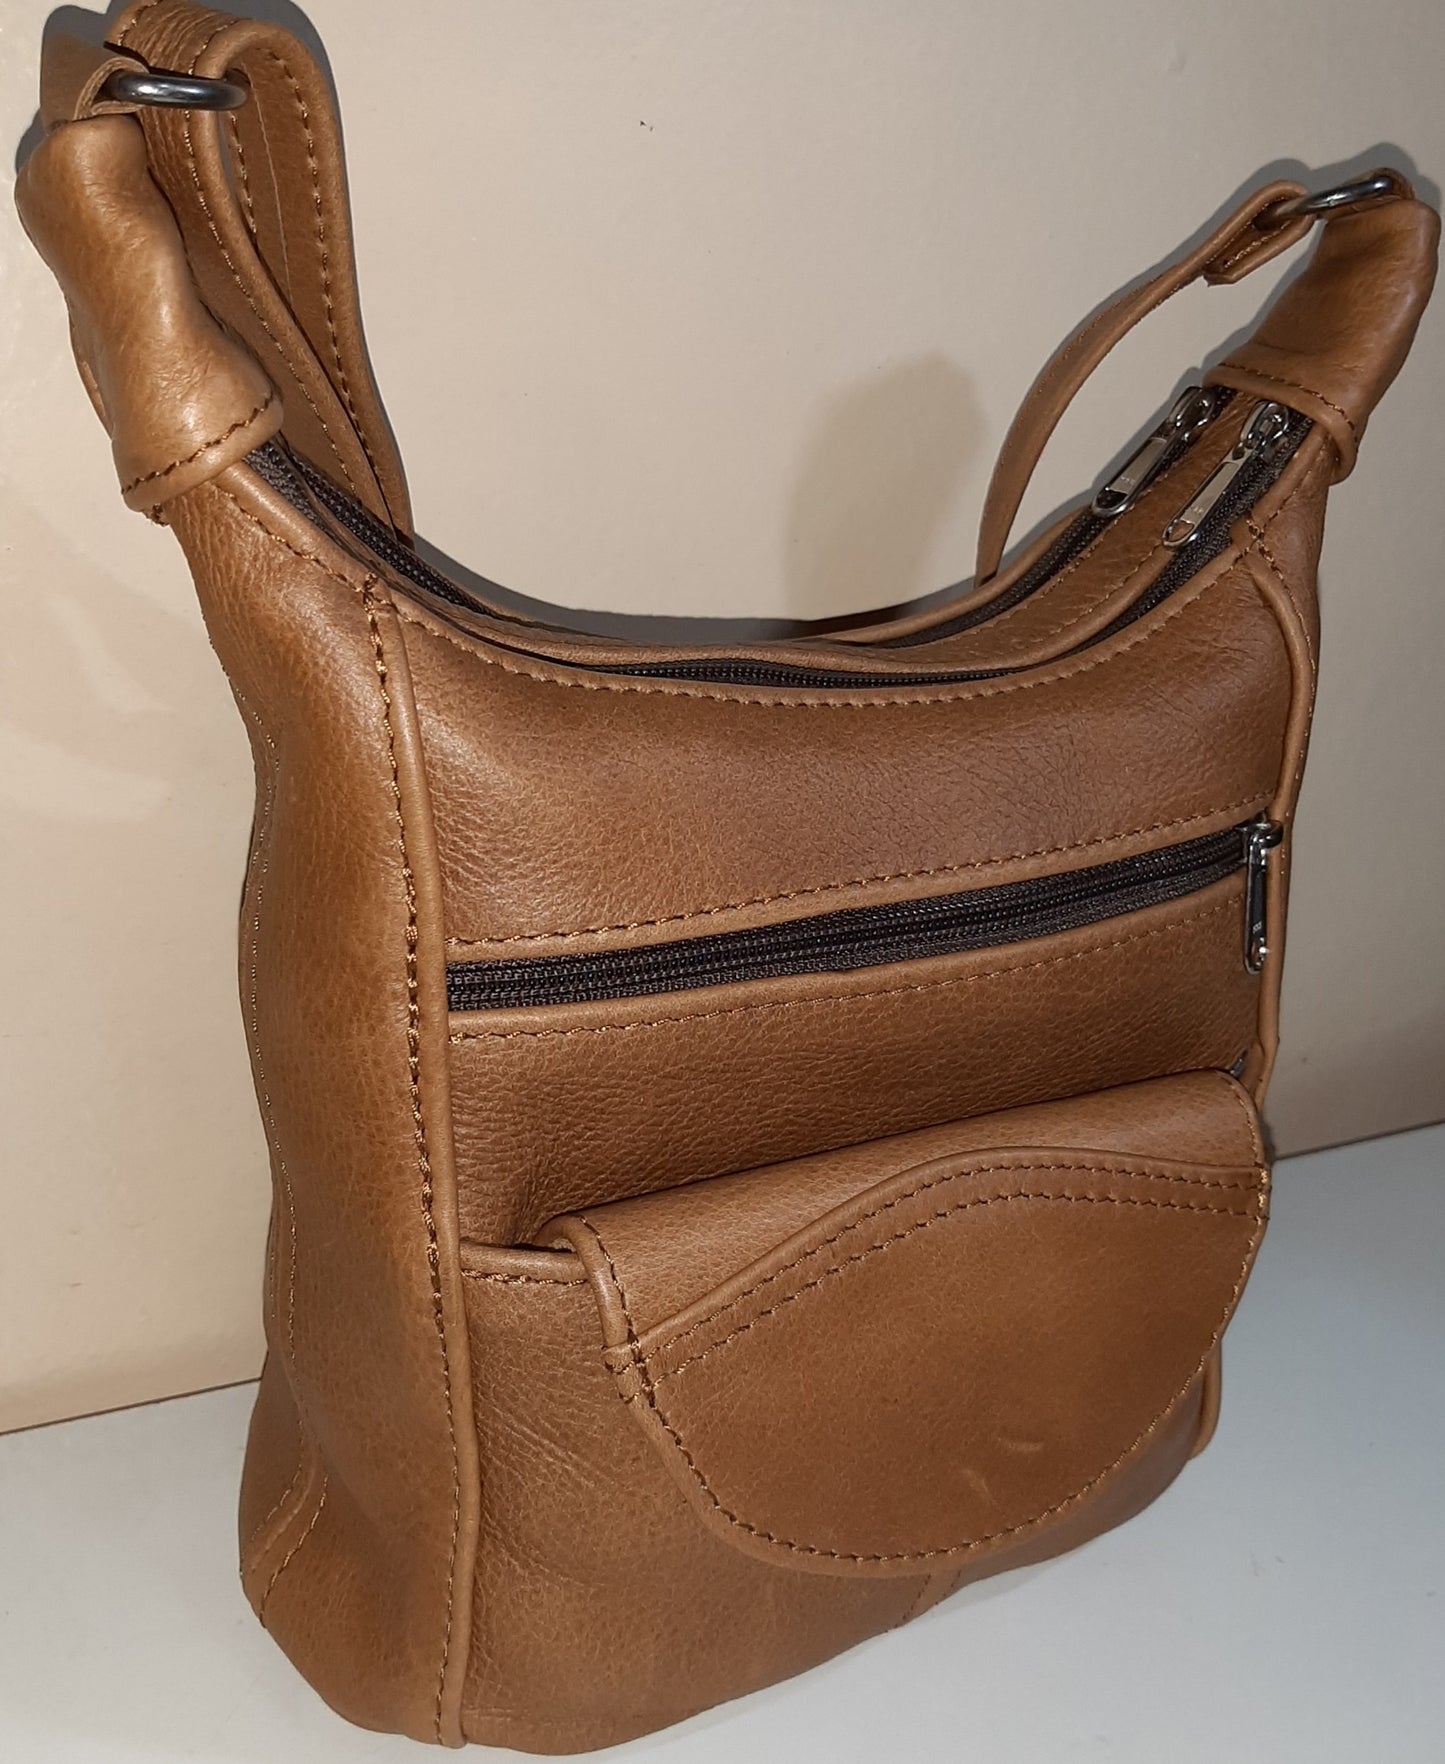 A SH small leather bags in ginger colour - cape Masai Leather